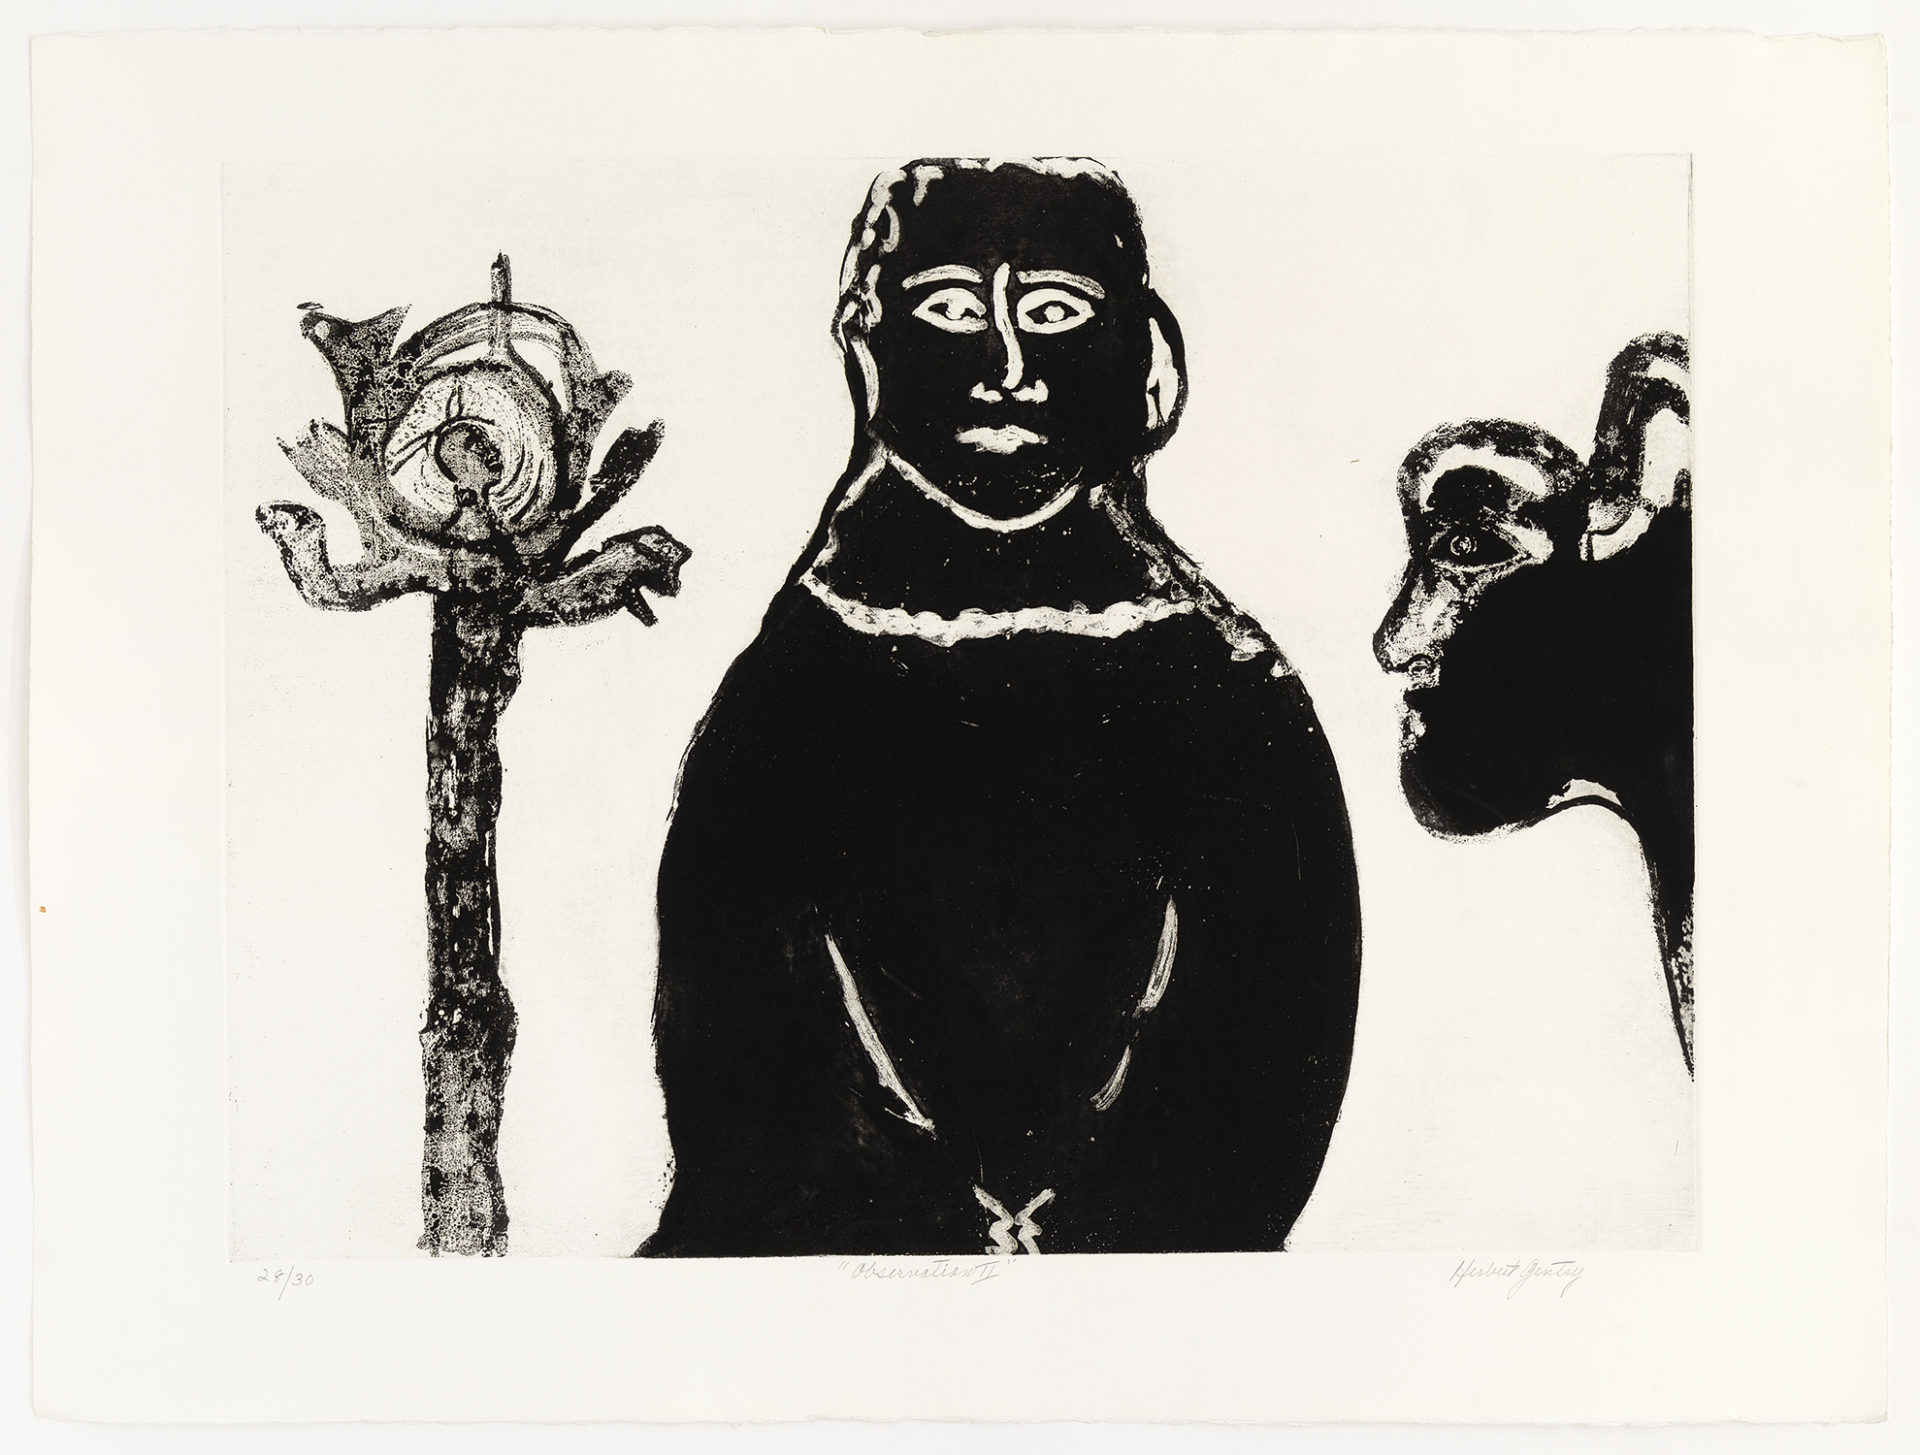 Observation II, 1984, Etching, 22 1/4 x 30 inches (56.5 x 76.2 cm), Edition of 30